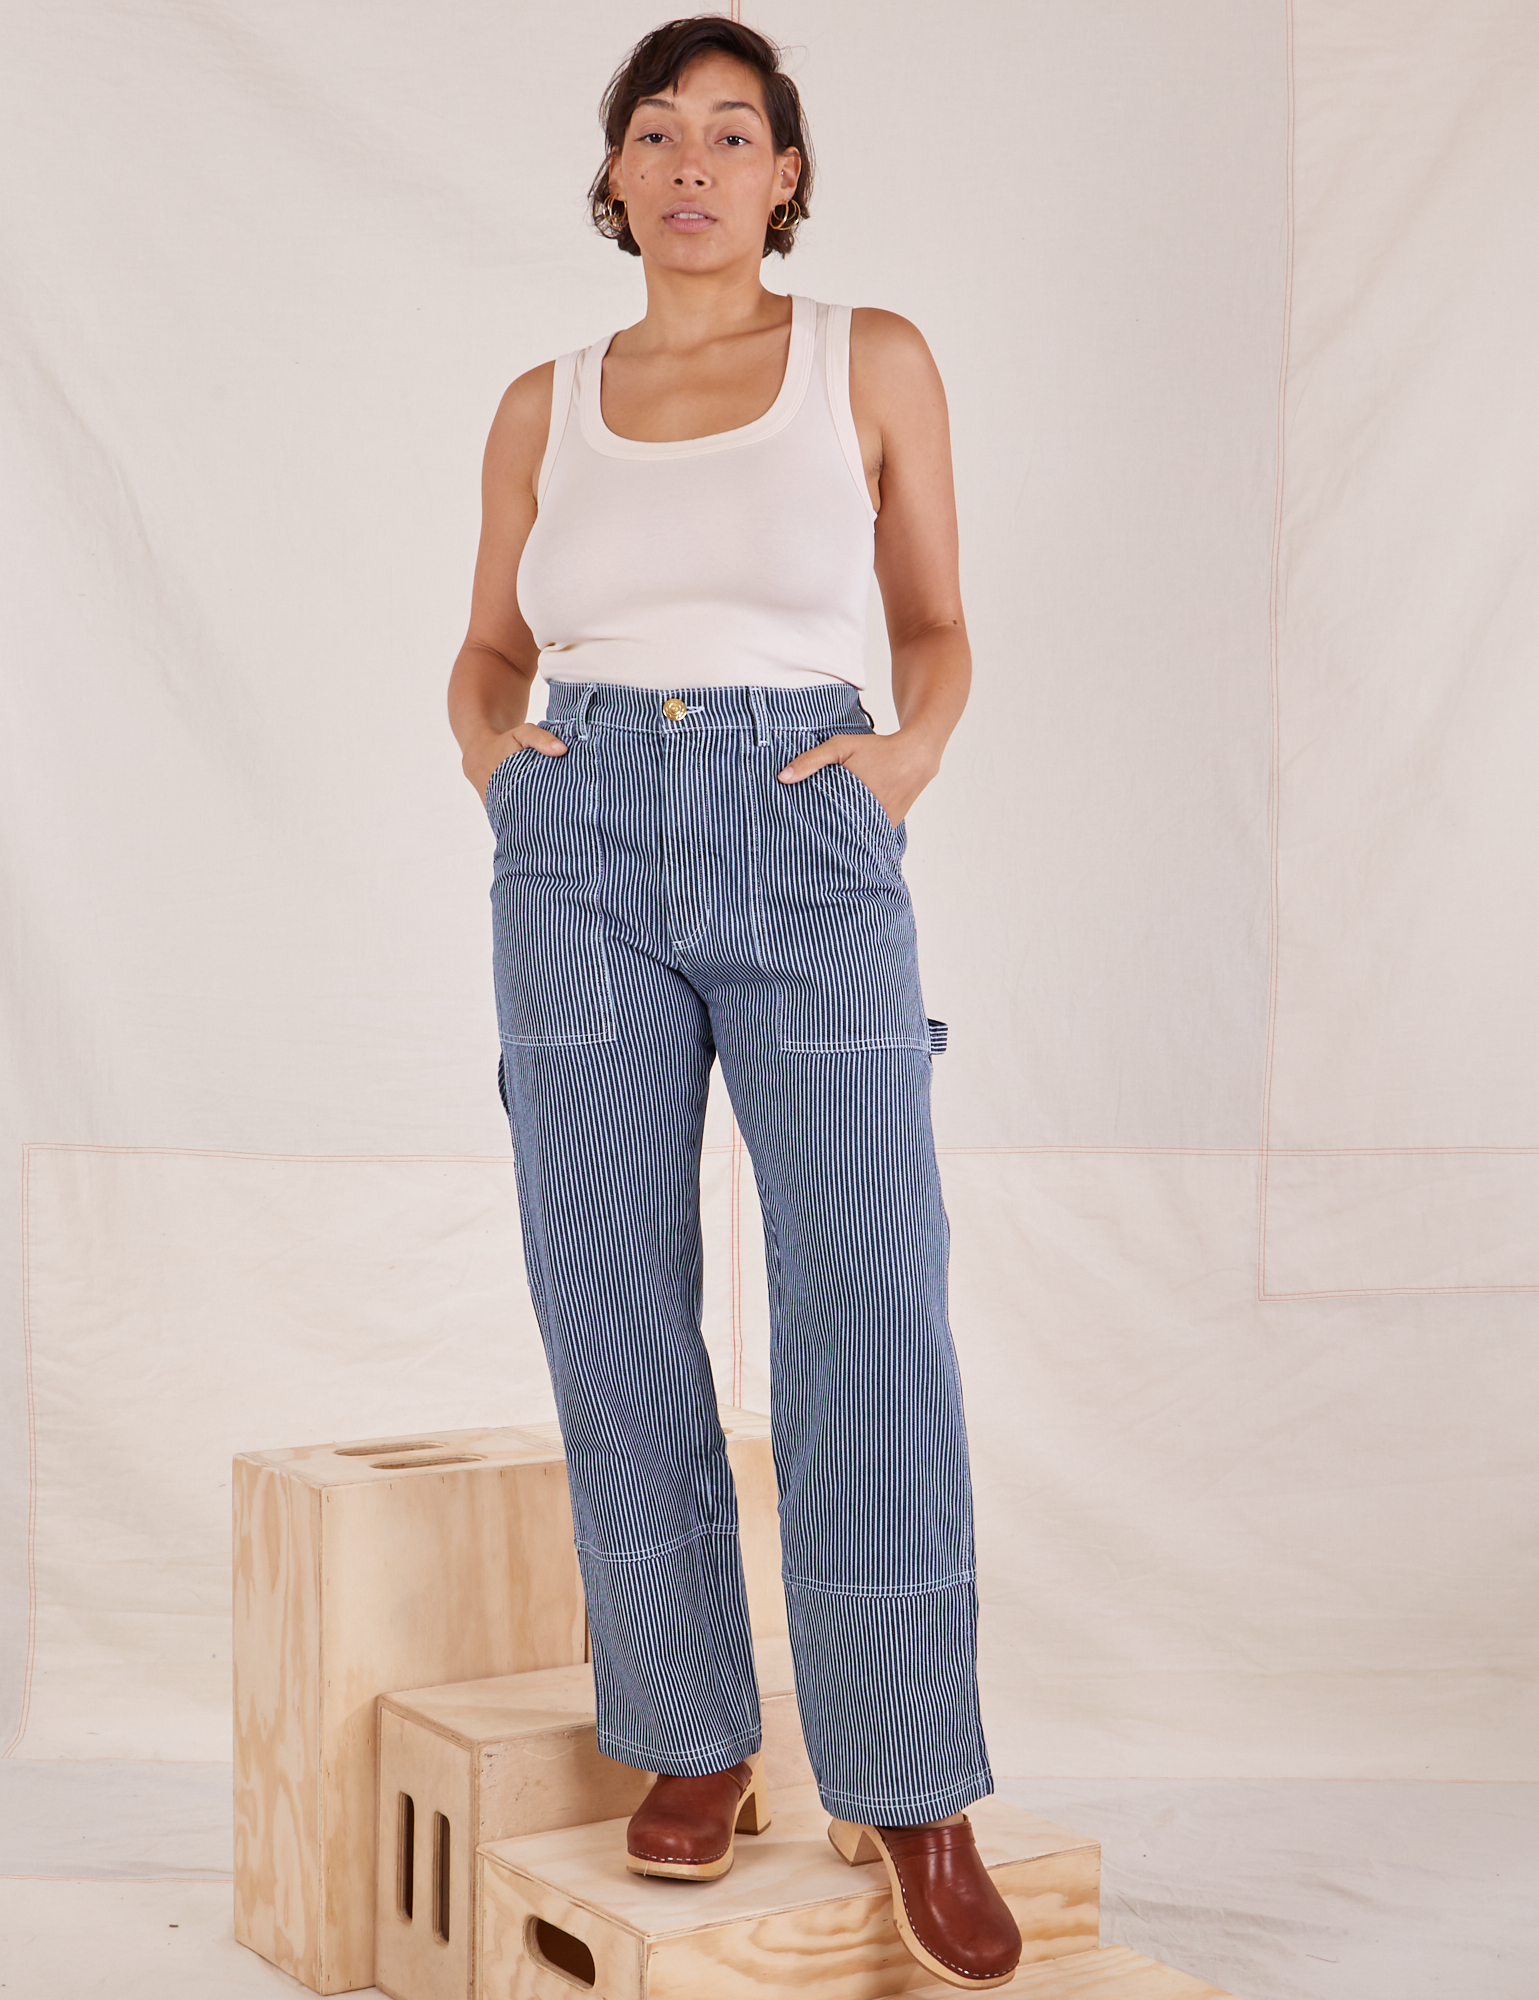 Tiara is 5&#39;4&quot; and wearing S Carpenter Jeans in Railroad Stripes paired with Tank Top in vintage tee off-white